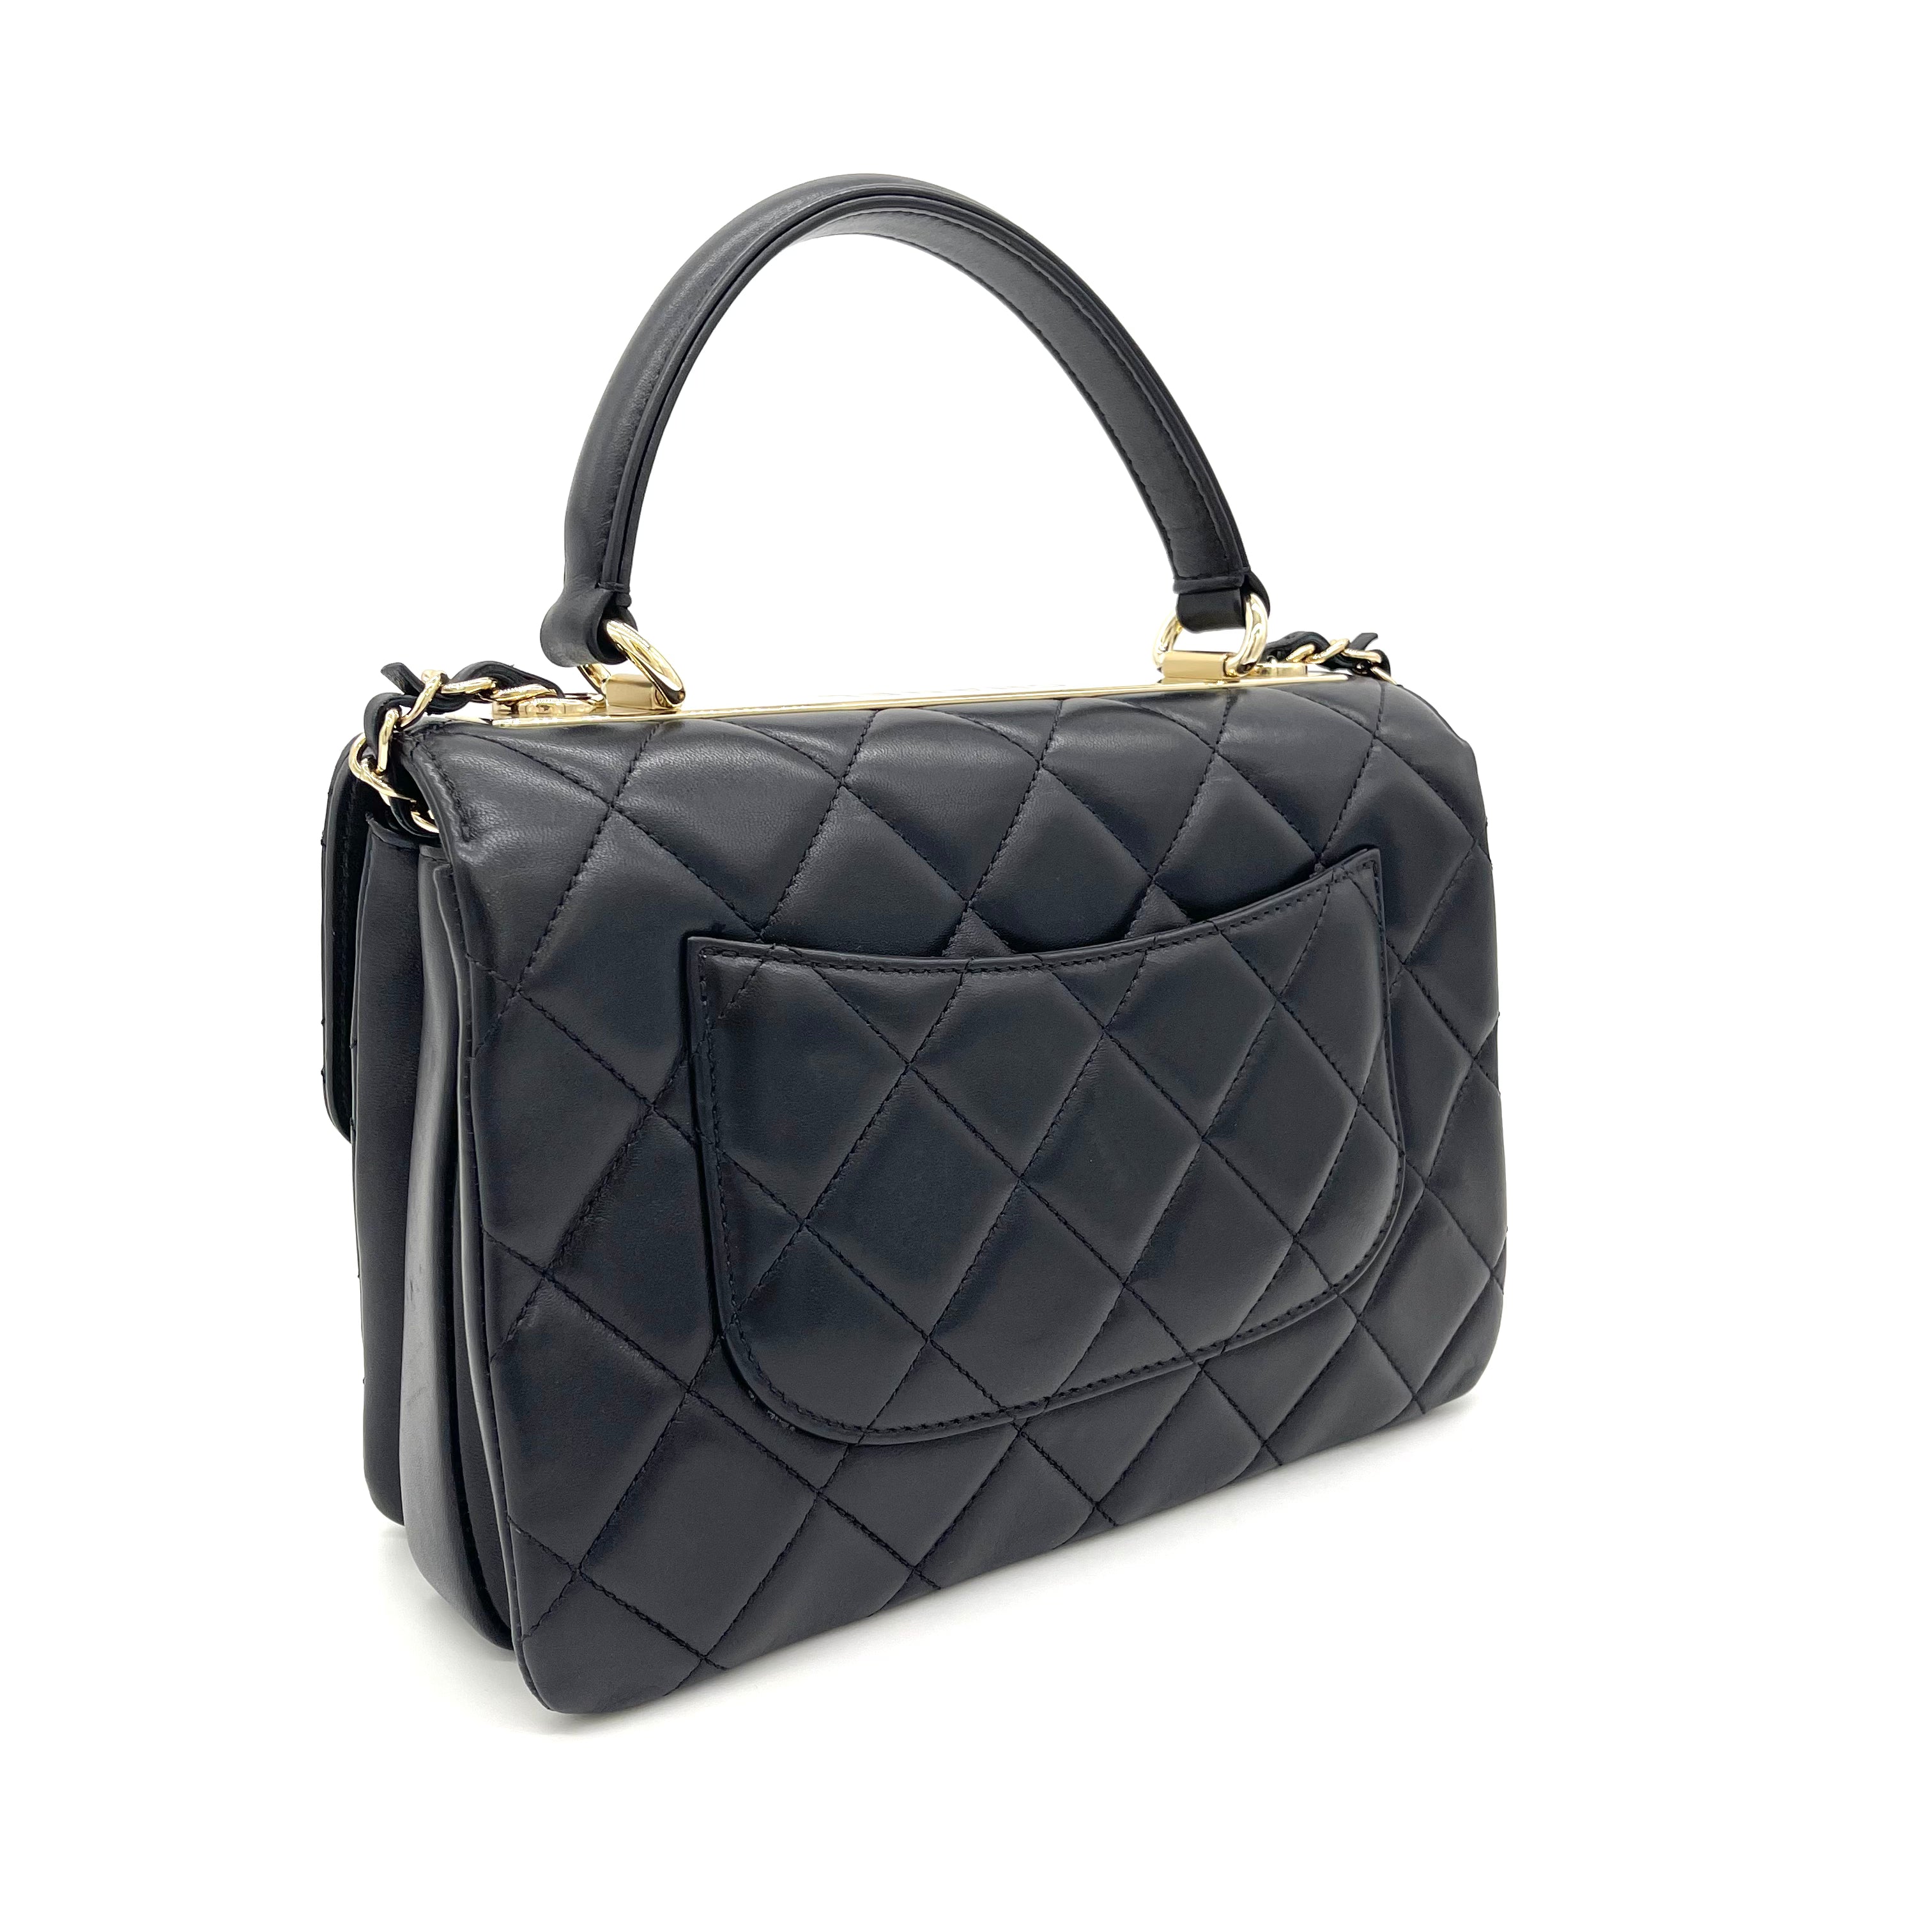 CHANEL Quilted Caviar Leather Top Handle Bag Black